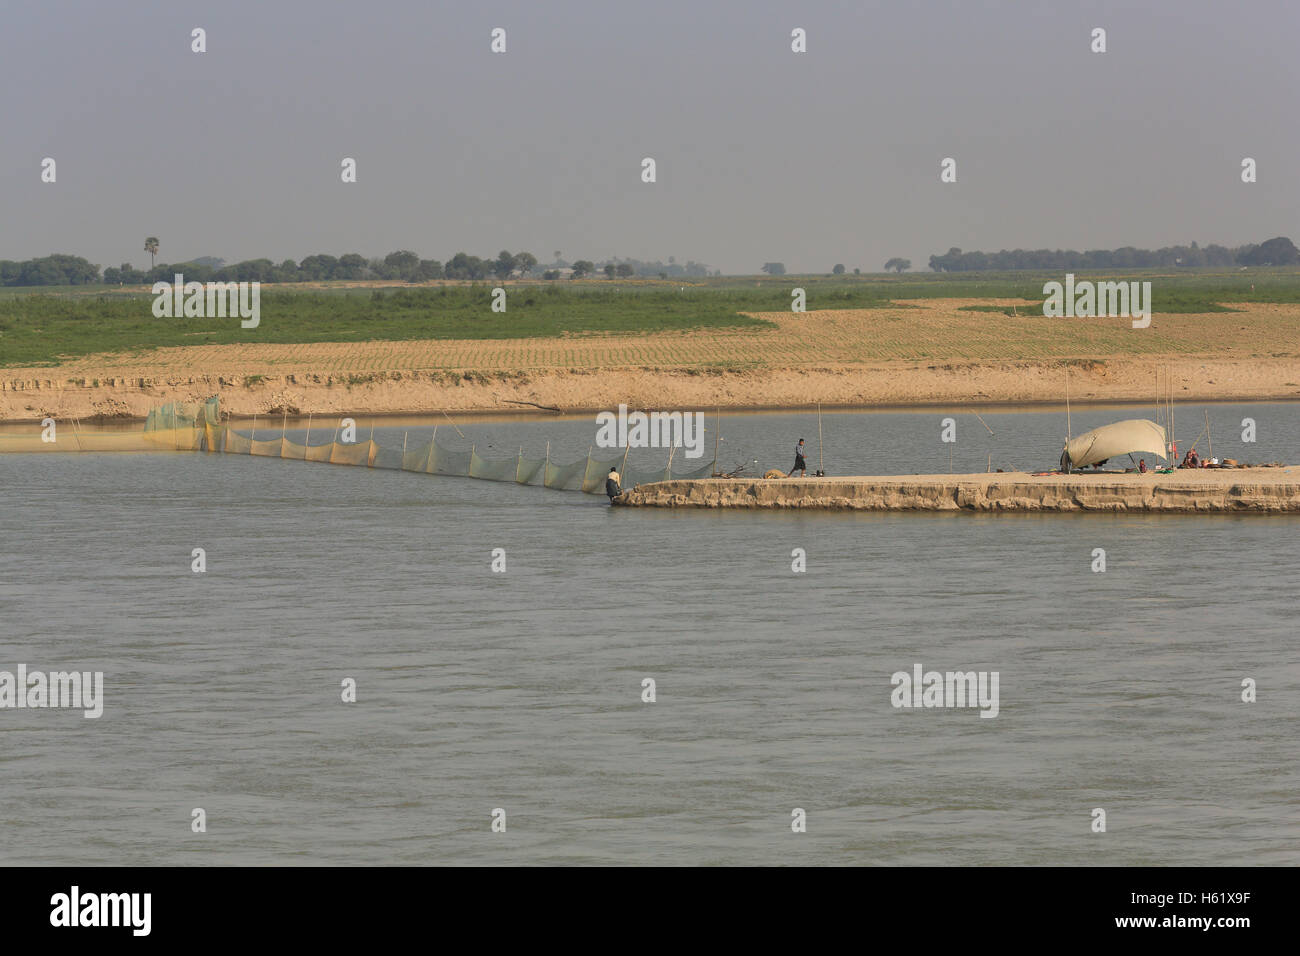 Fishermen use nets to trap fish on the Irrawaddy River in Myanmar. Stock Photo